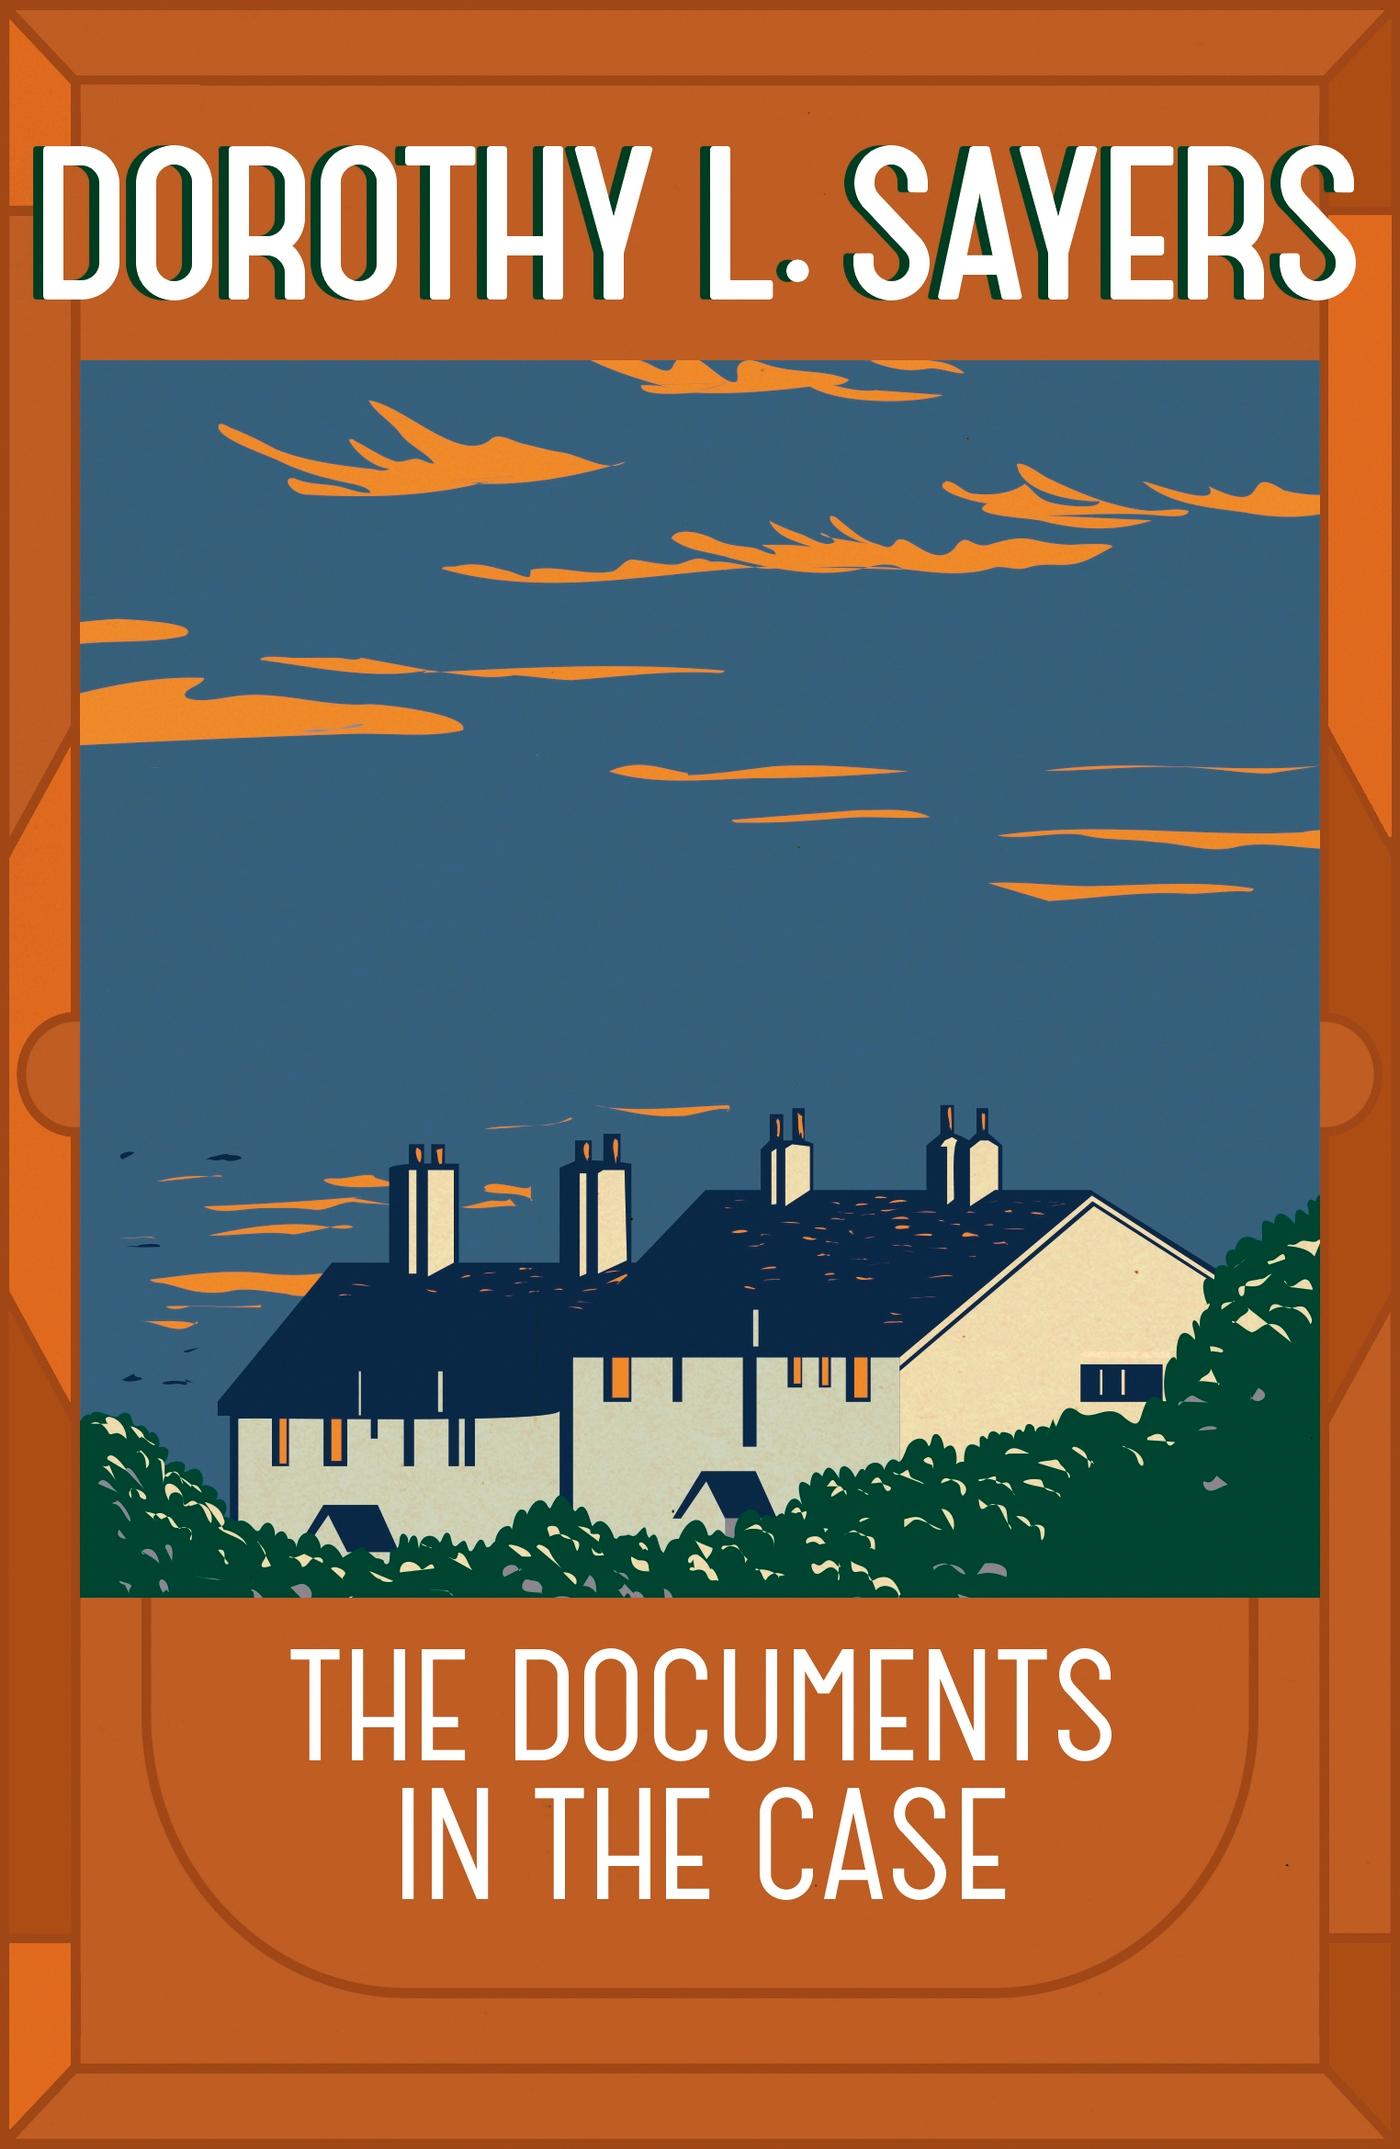 The Documents in the Case | Dorothy L Sayers | Taschenbuch | 260 S. | Englisch | 2016 | Hodder & Stoughton | EAN 9781473621343 - Sayers, Dorothy L